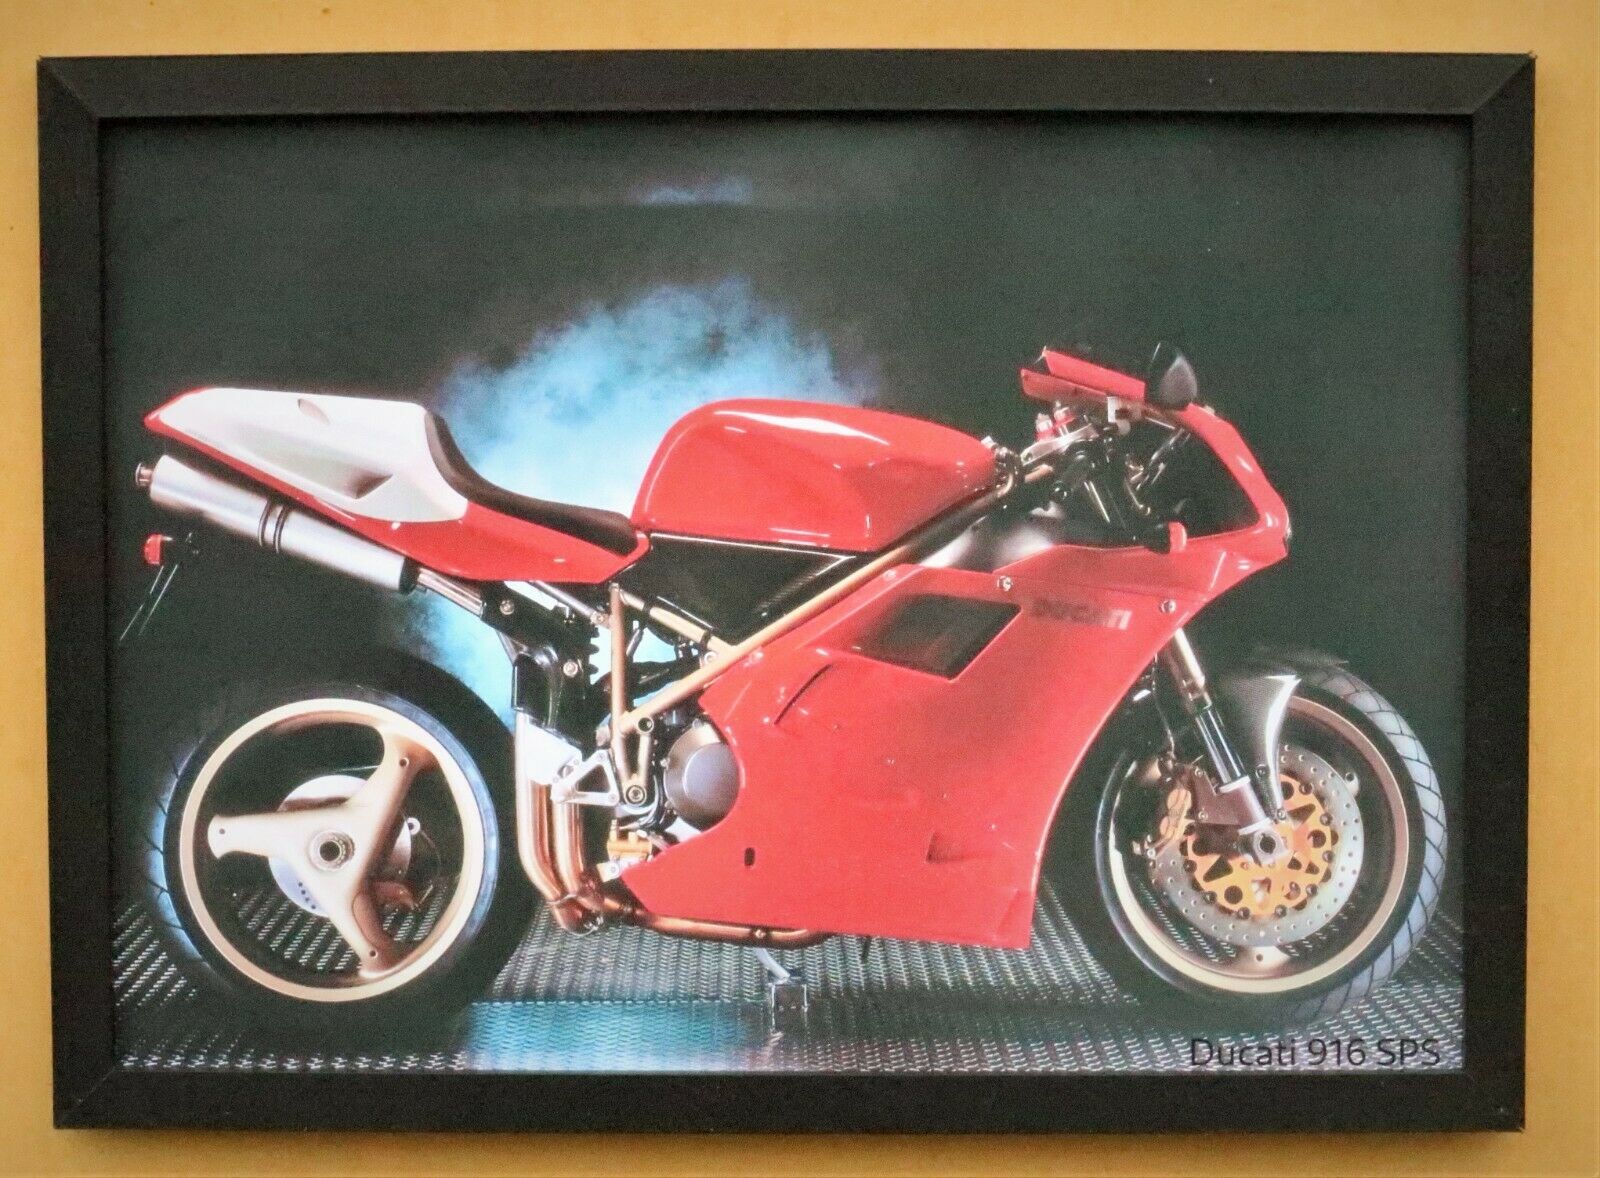 Ducati 916 SPS Motorcycle A3/A4 Size Print Poster on Photographic Paper